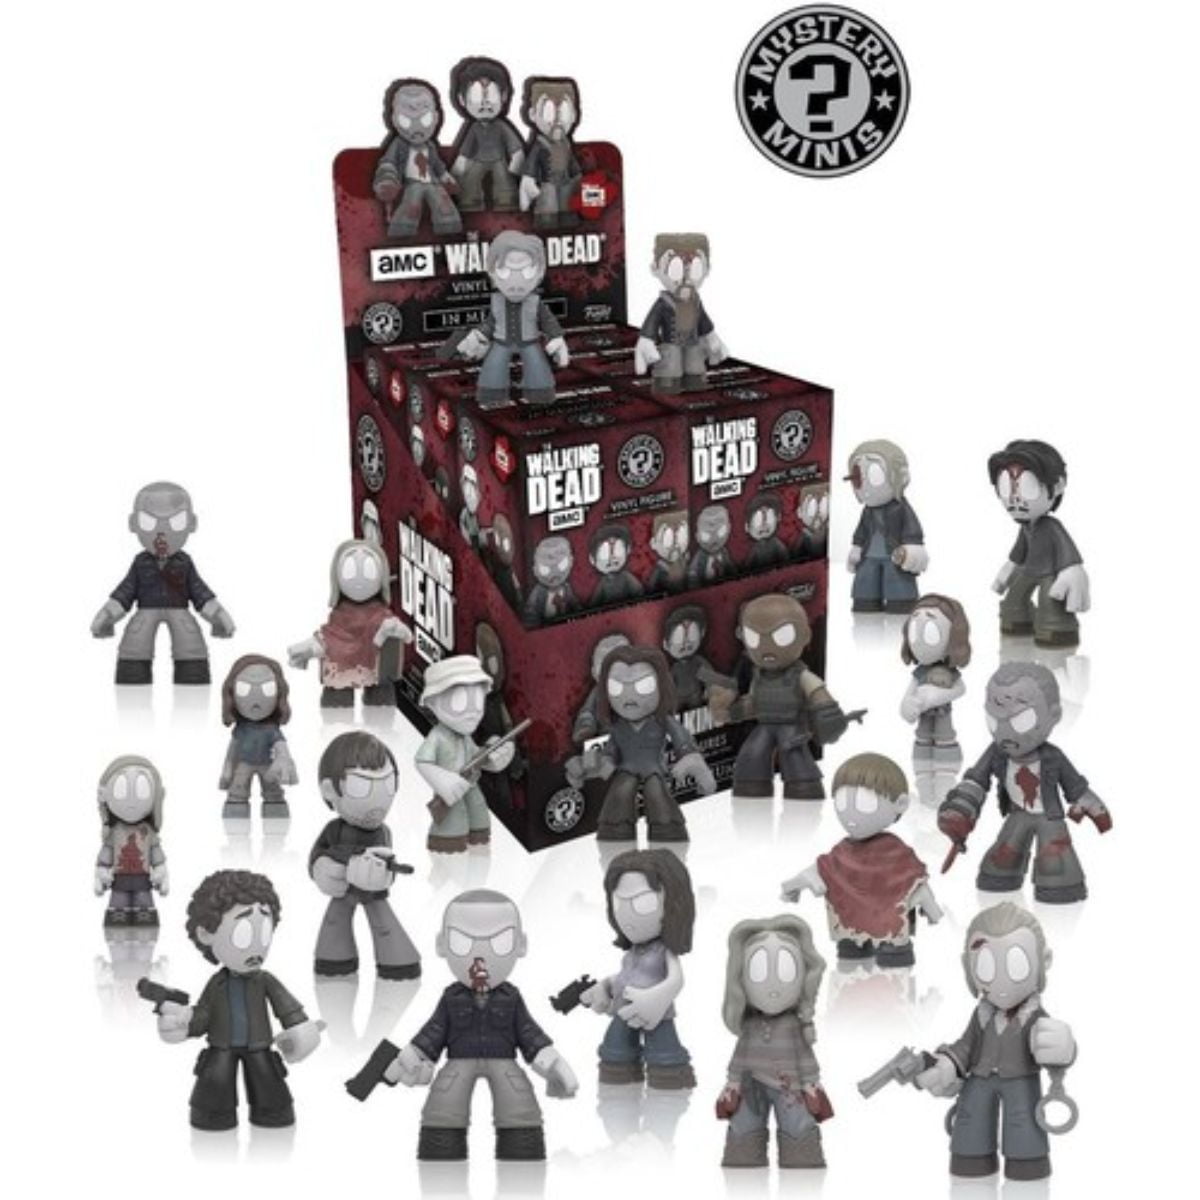 CHOOSE YOUR OWN 2018 Funko FANTASTIC BEASTS & Where To Find Them Mystery Minis 